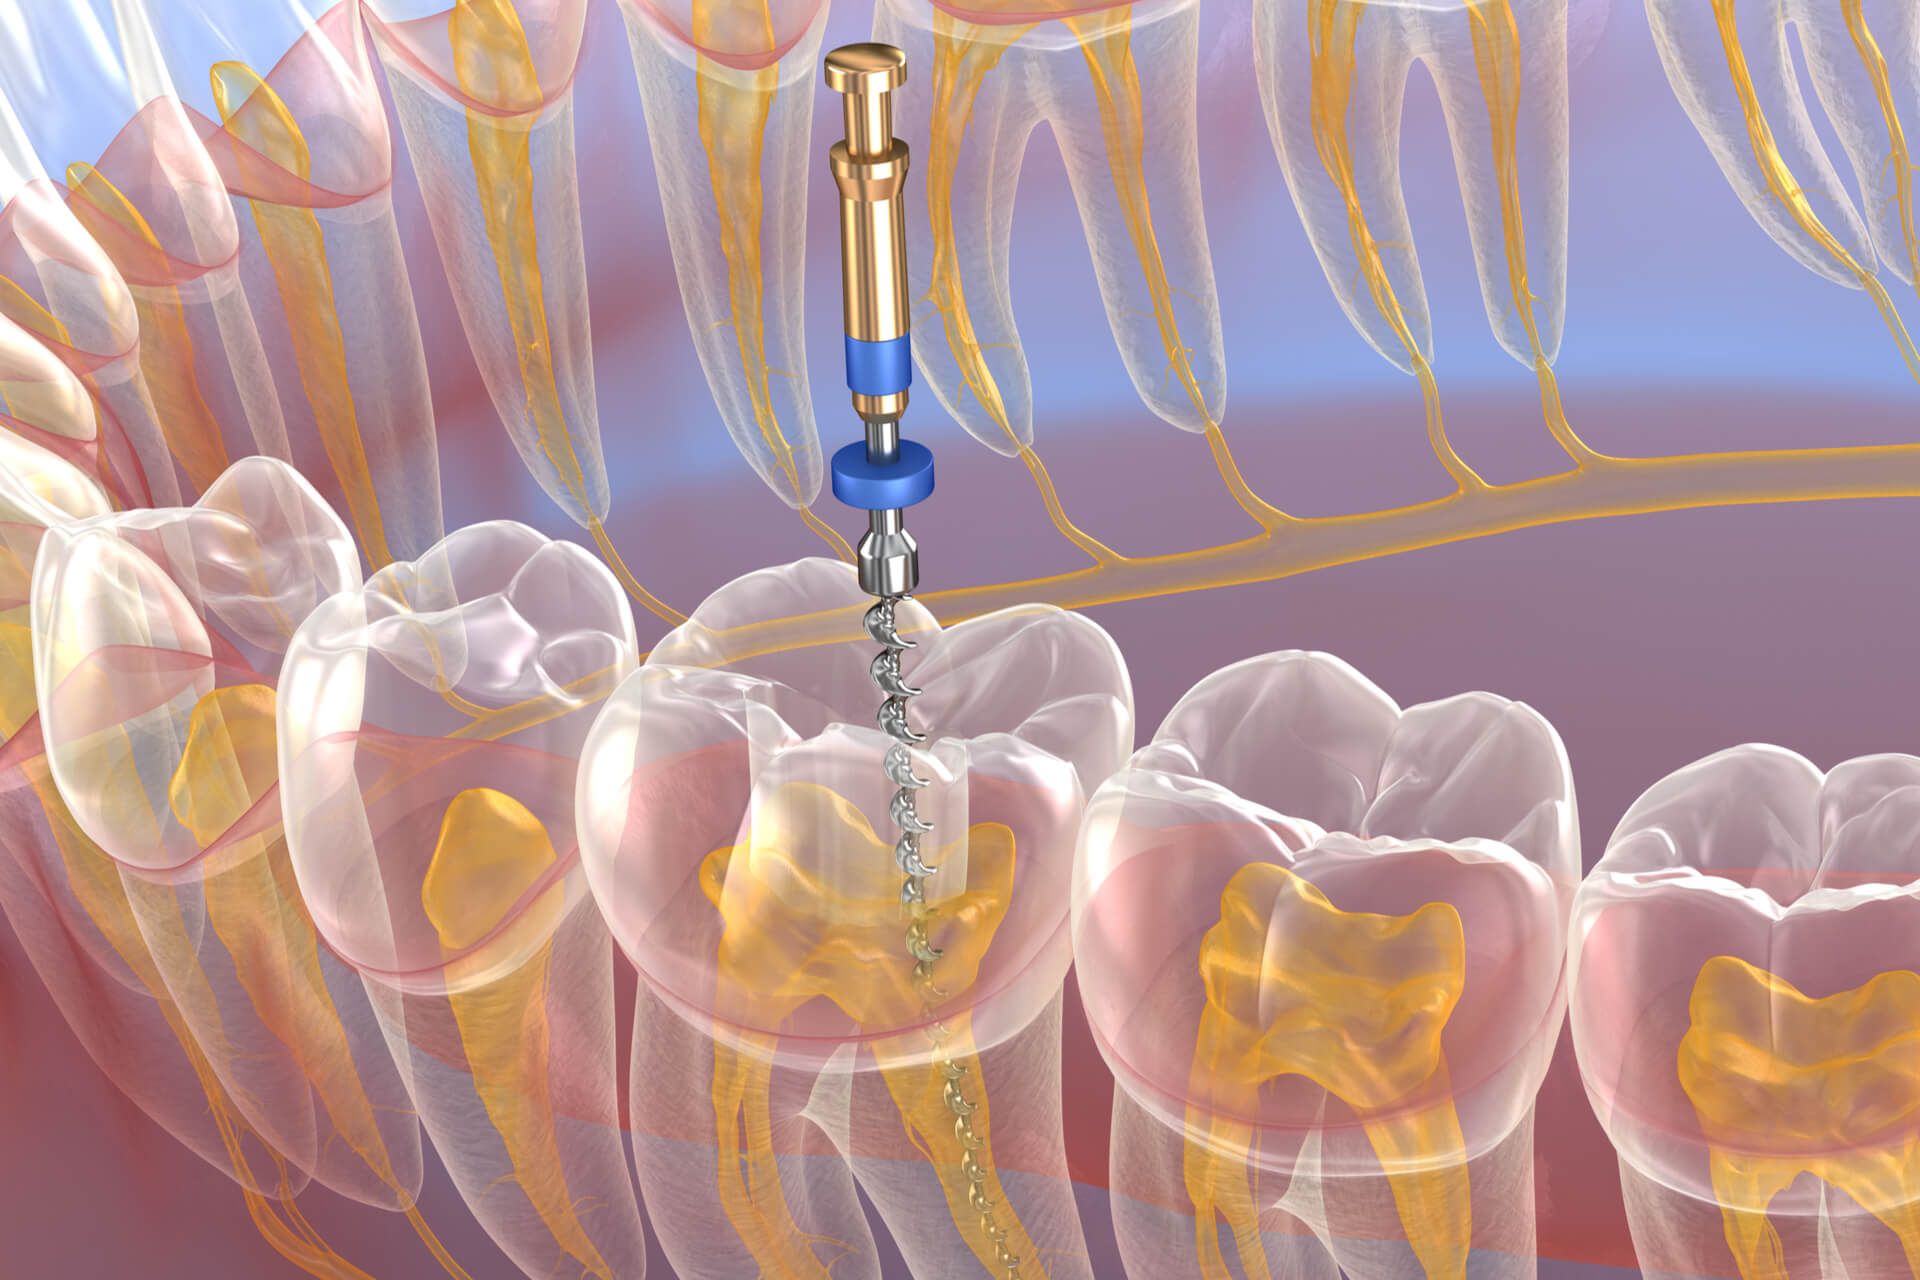 Medically accurate tooth 3D illustration.